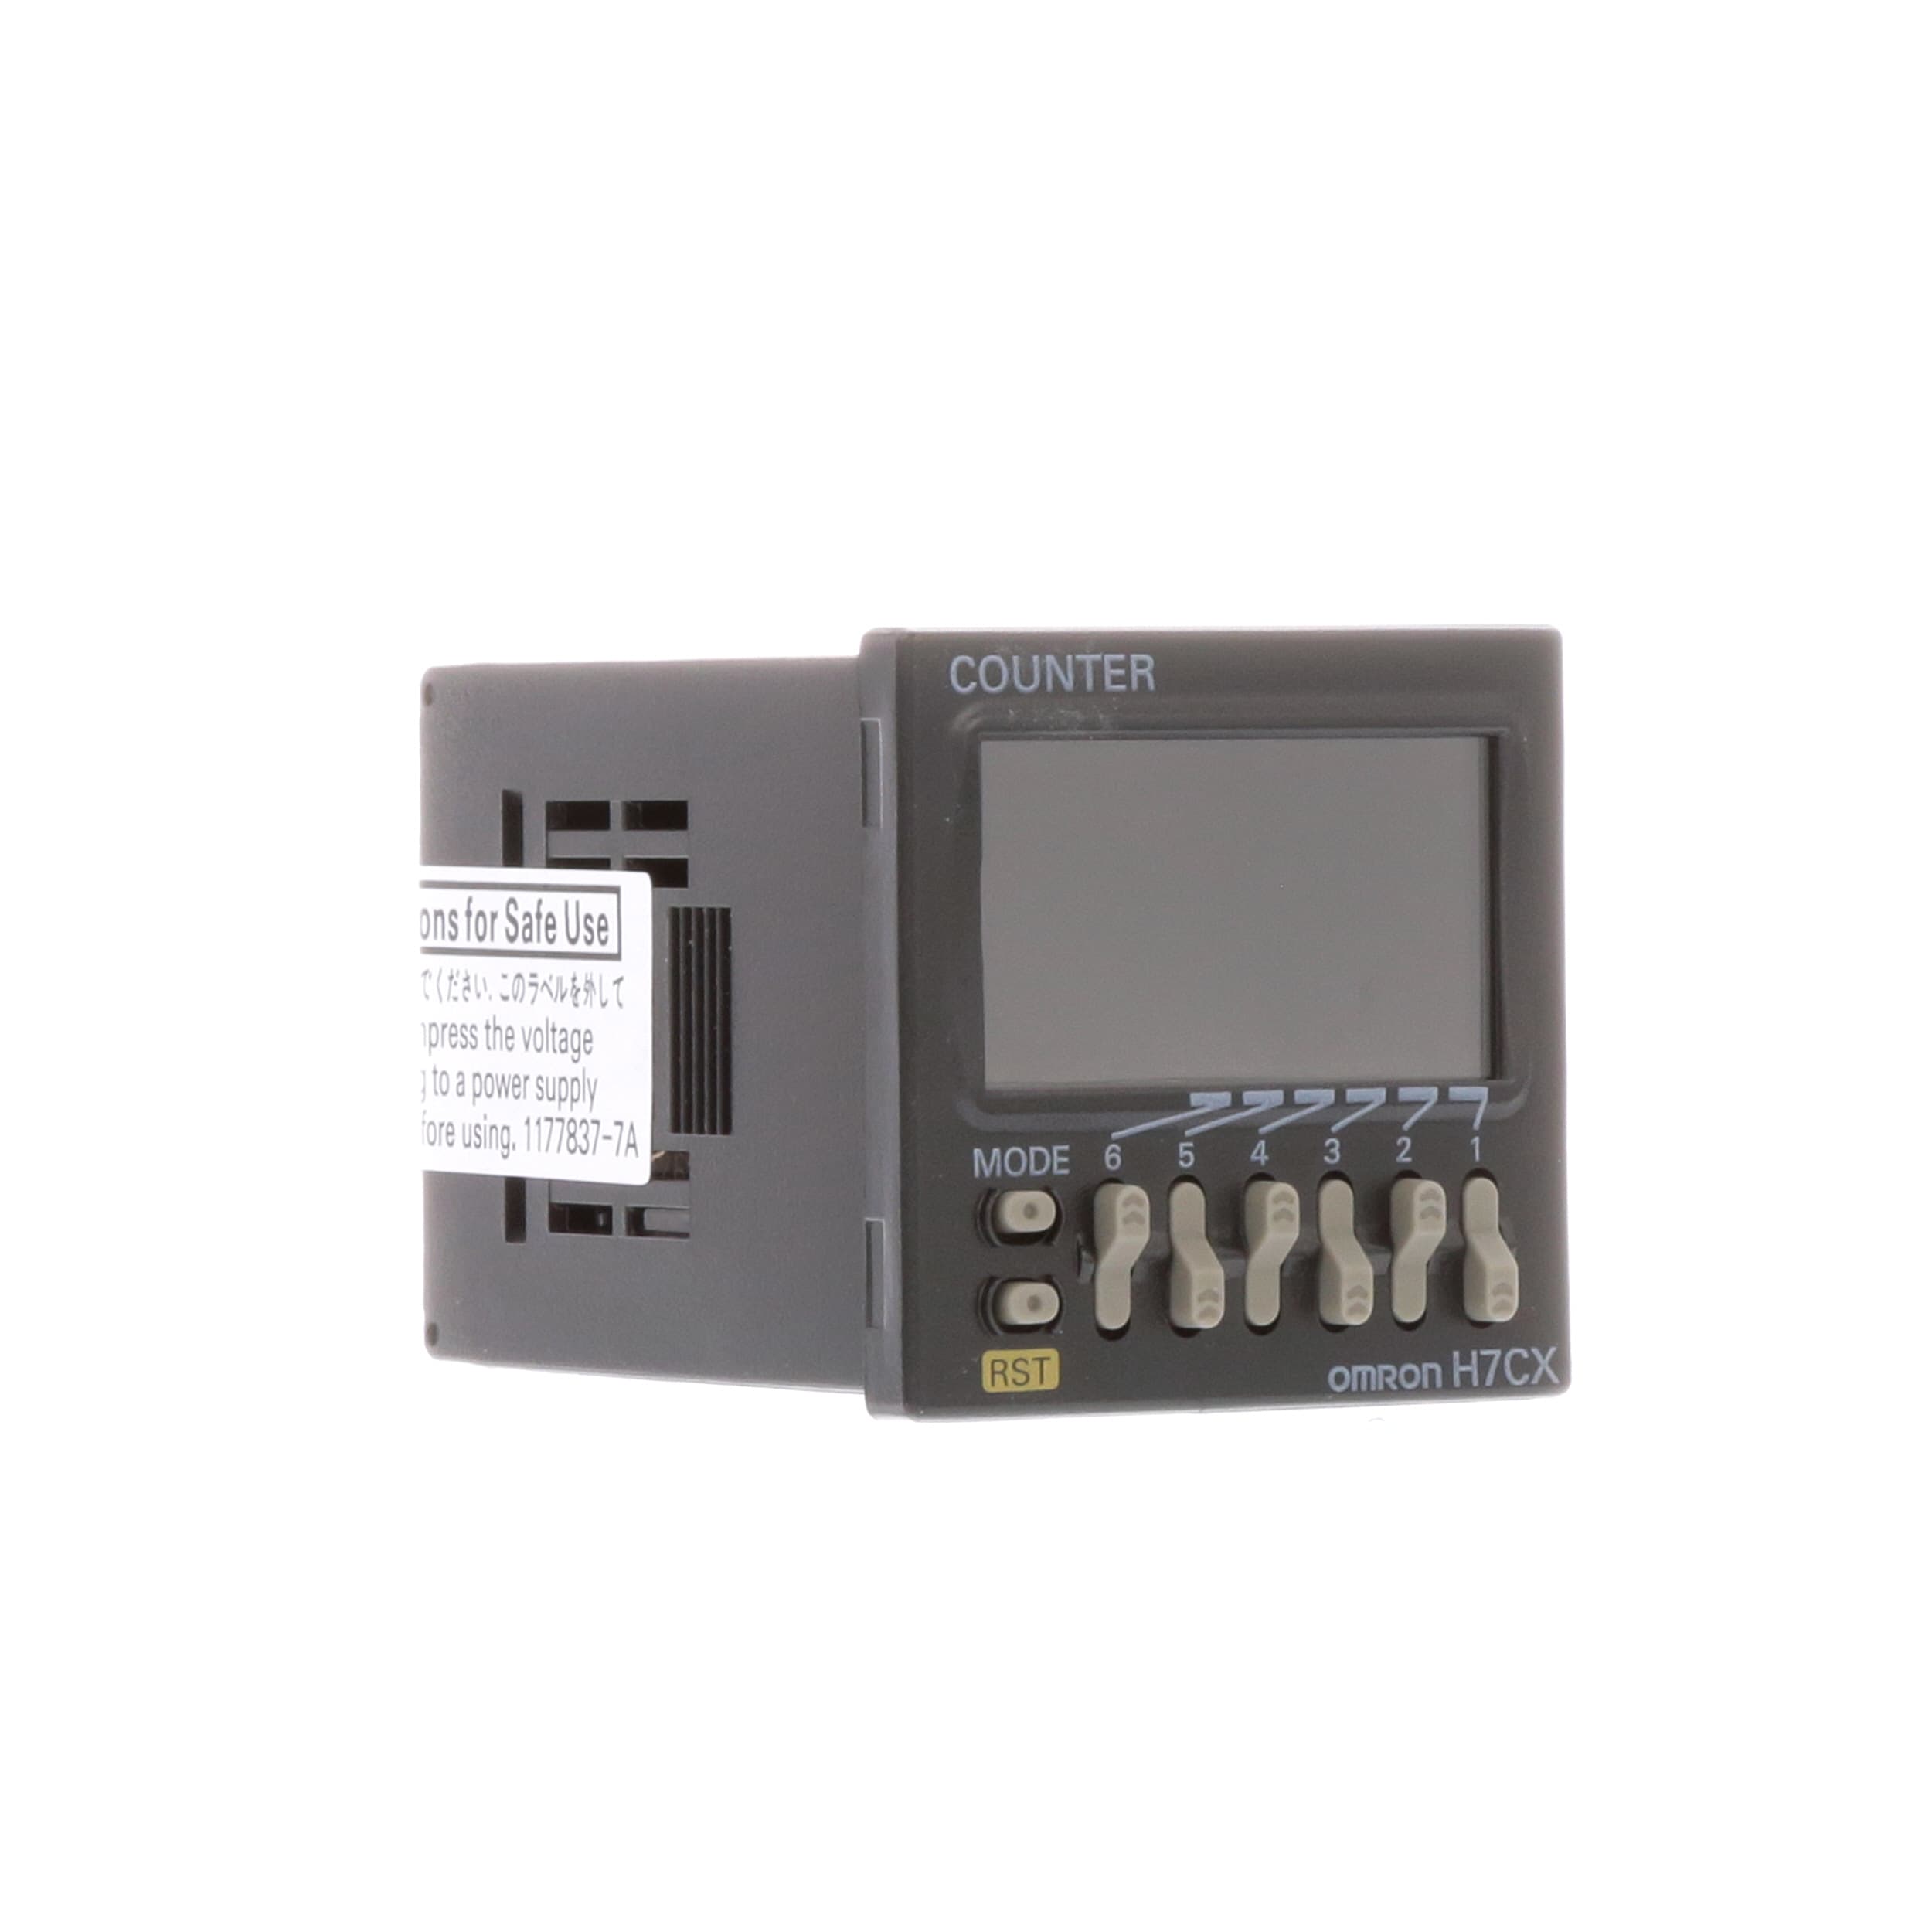 1pc Omron H7cx-ad-n 12-24vdc Digital Counter H7CXADN for sale online